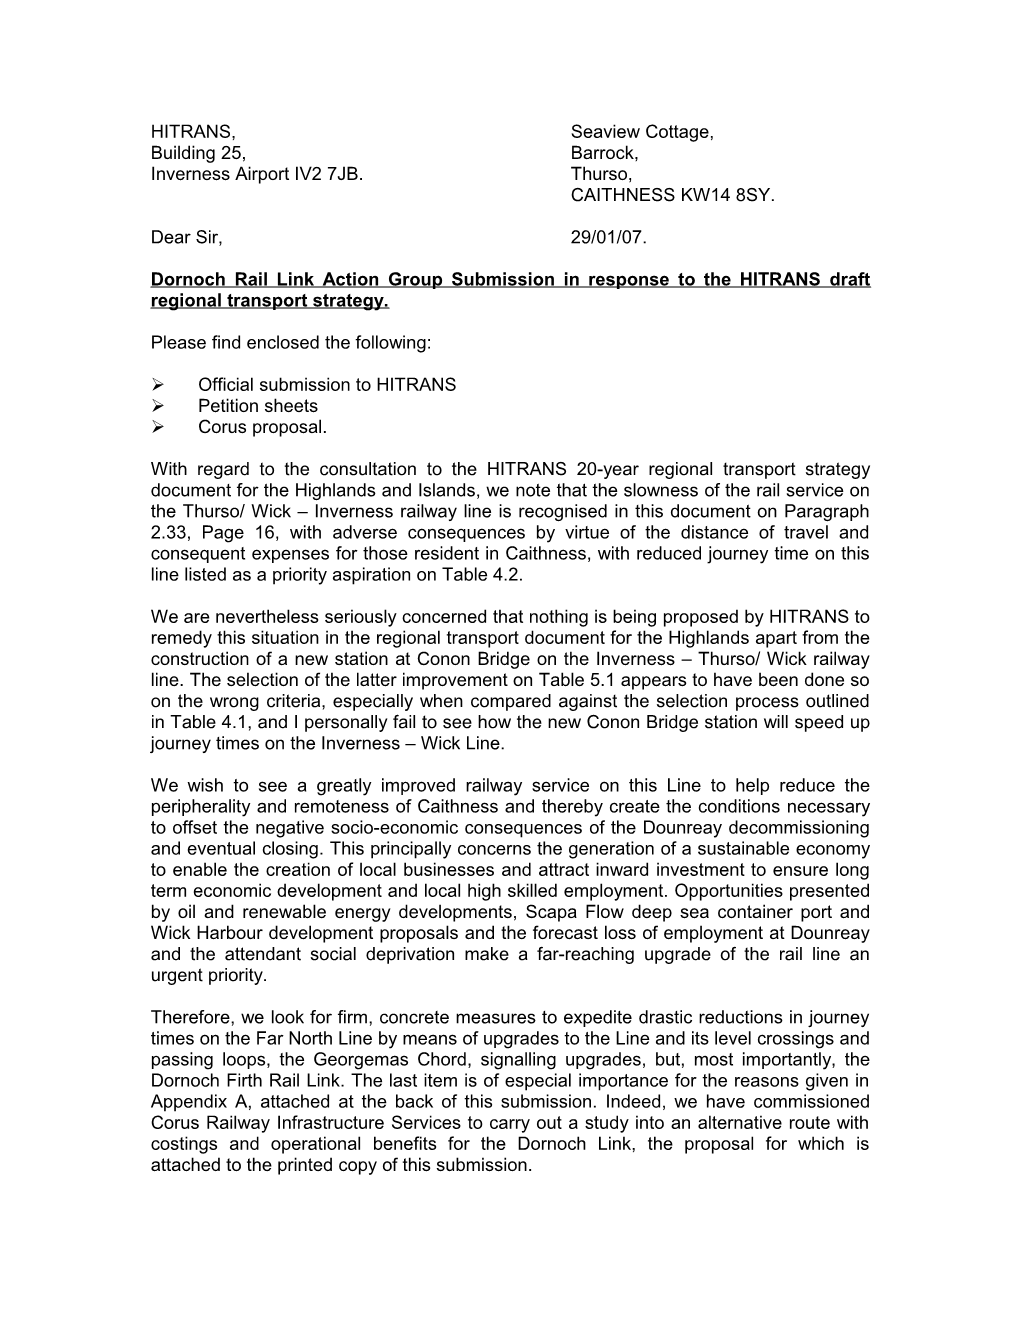 UK Atomic Energy Authority Submission in Response to the HITRANS Draft Regional Transport